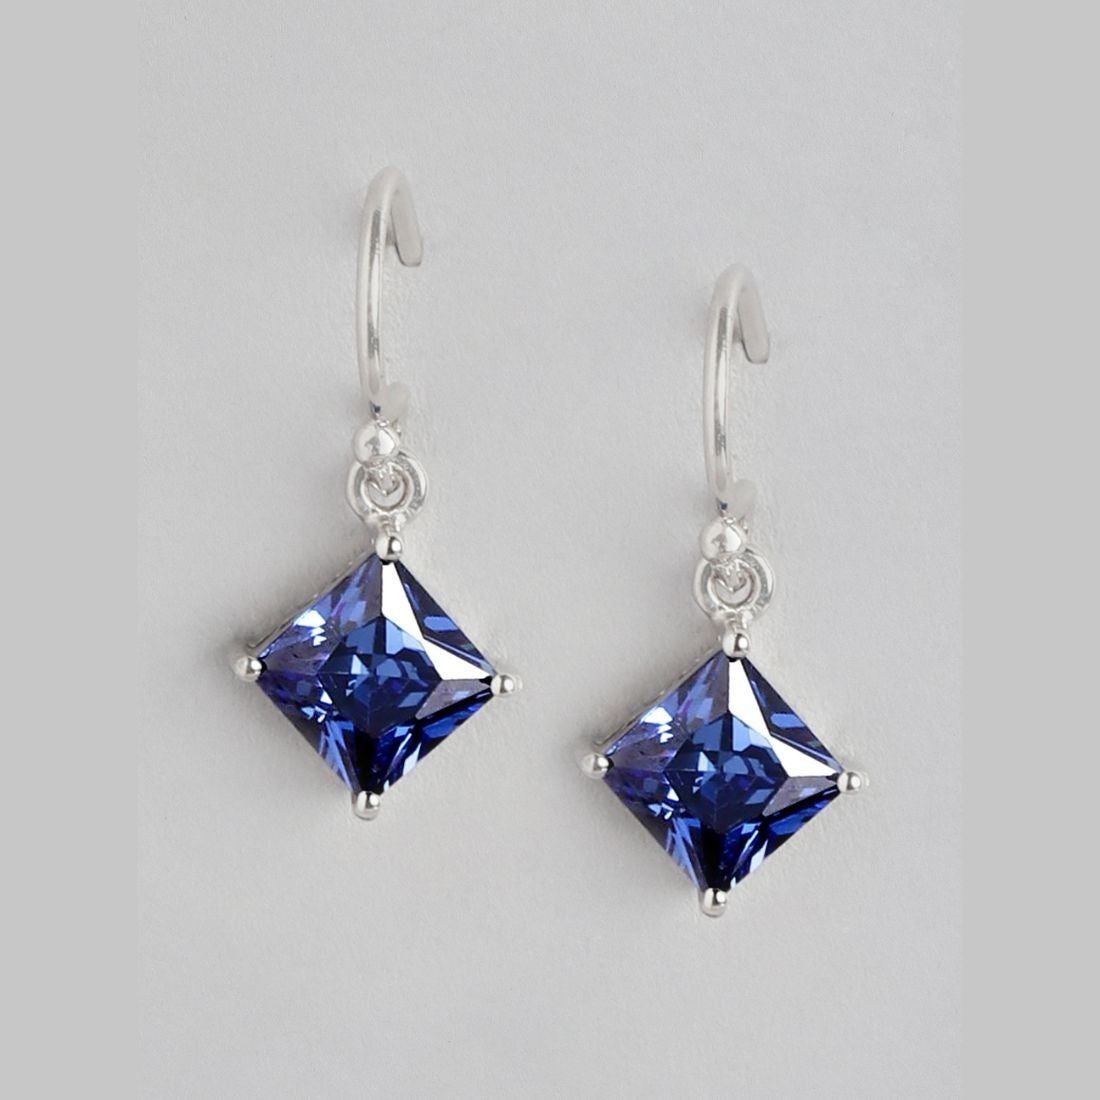 Sparkling Ocean Rhodium Plated 925 Sterling Silver Earring